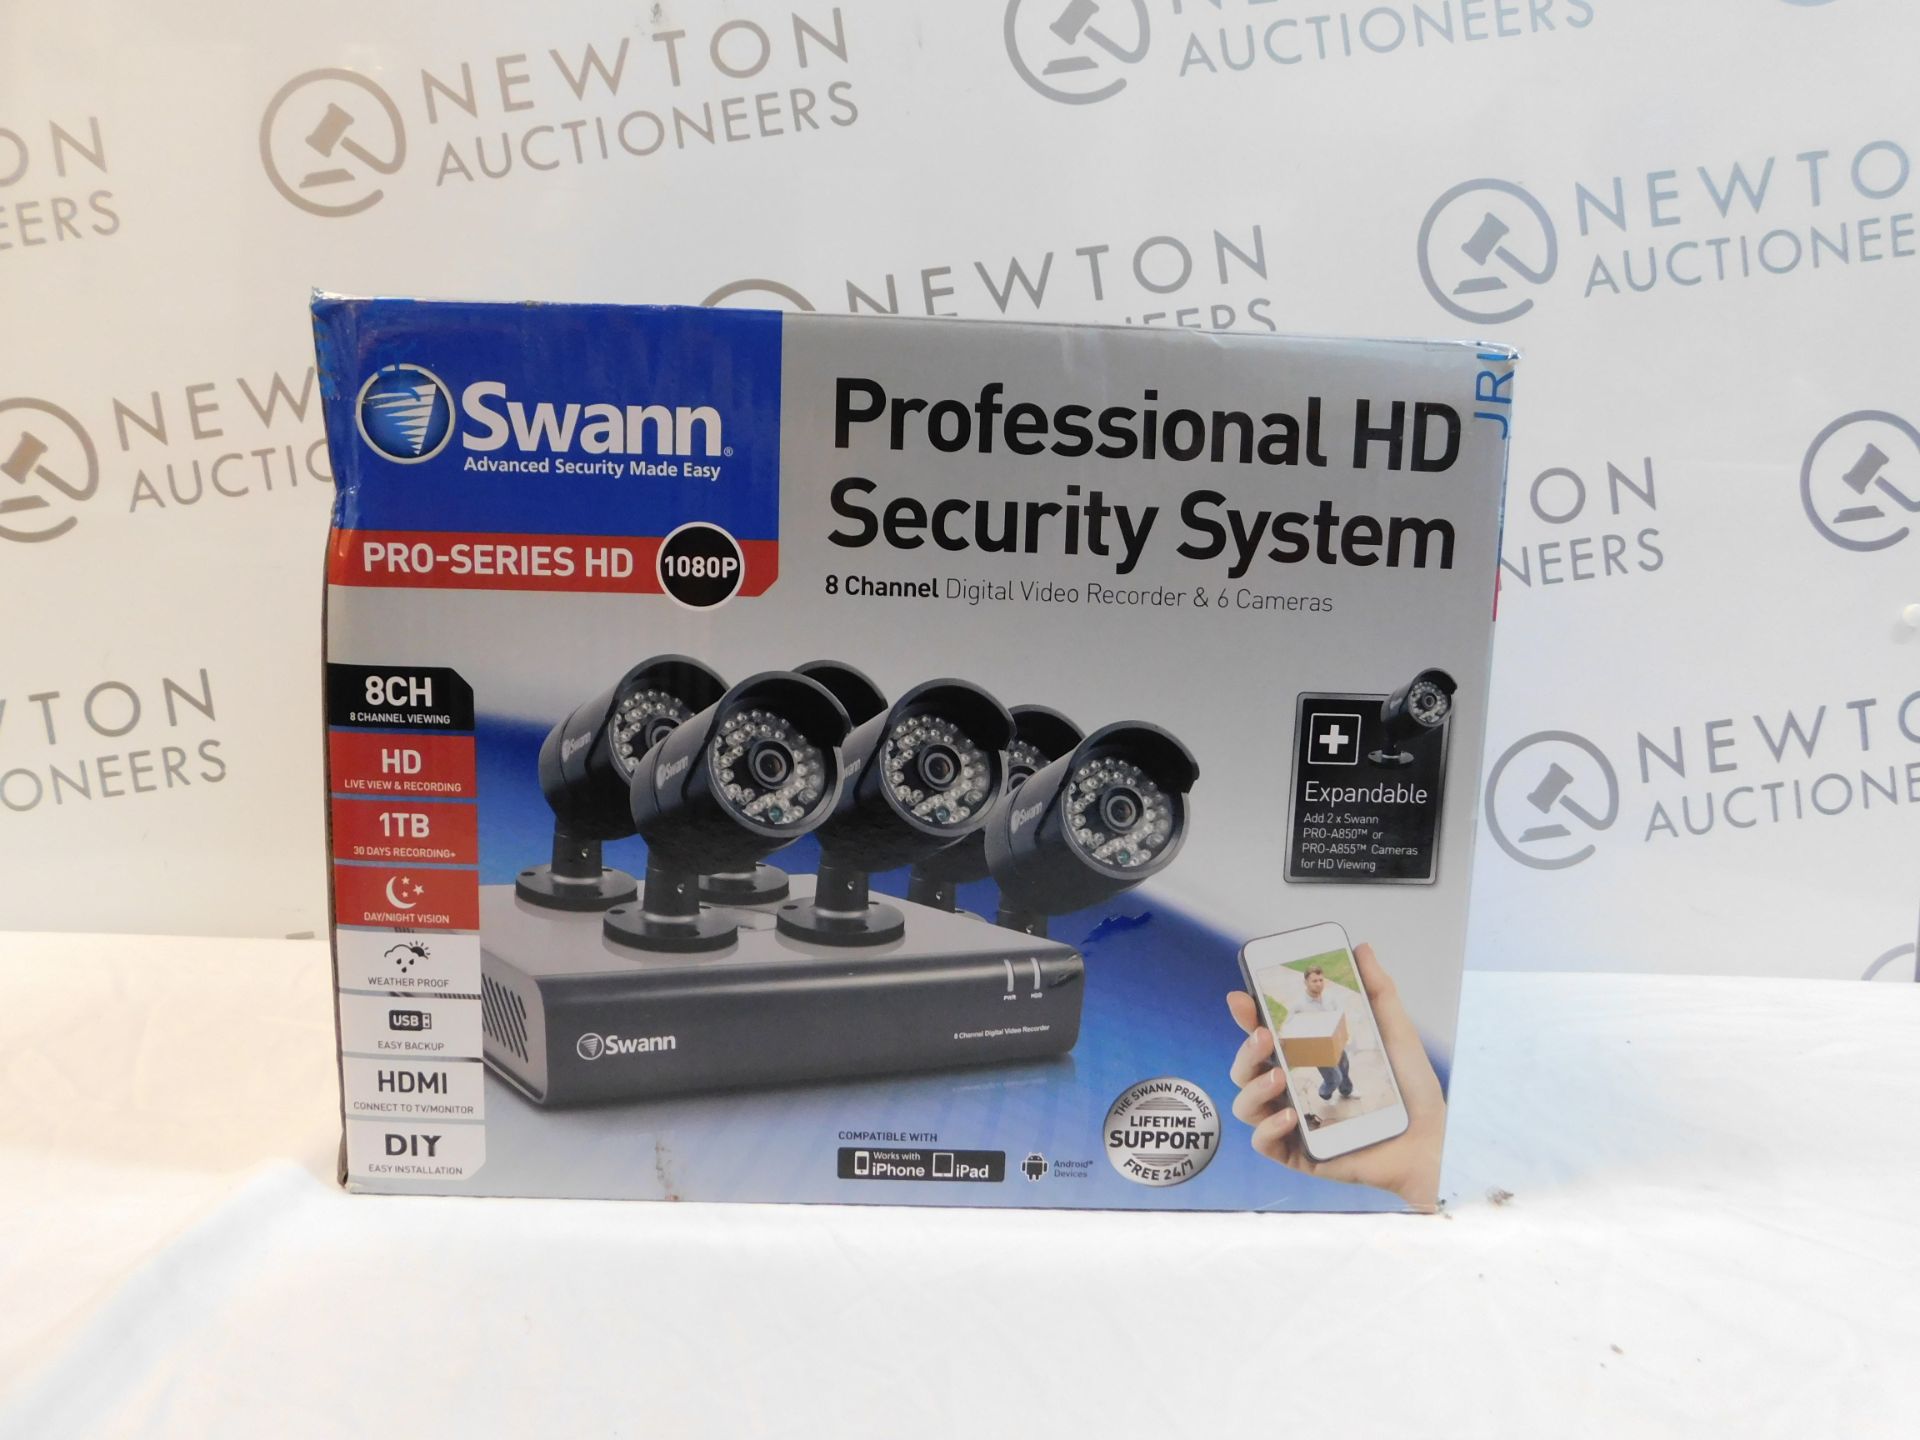 1 BOXED SWANN PRO-SERIES HD SECURITY SYSTEM - DVR8-4600 8CH 1080P DIGITAL VIDEO RECORDER & 6 PRO-